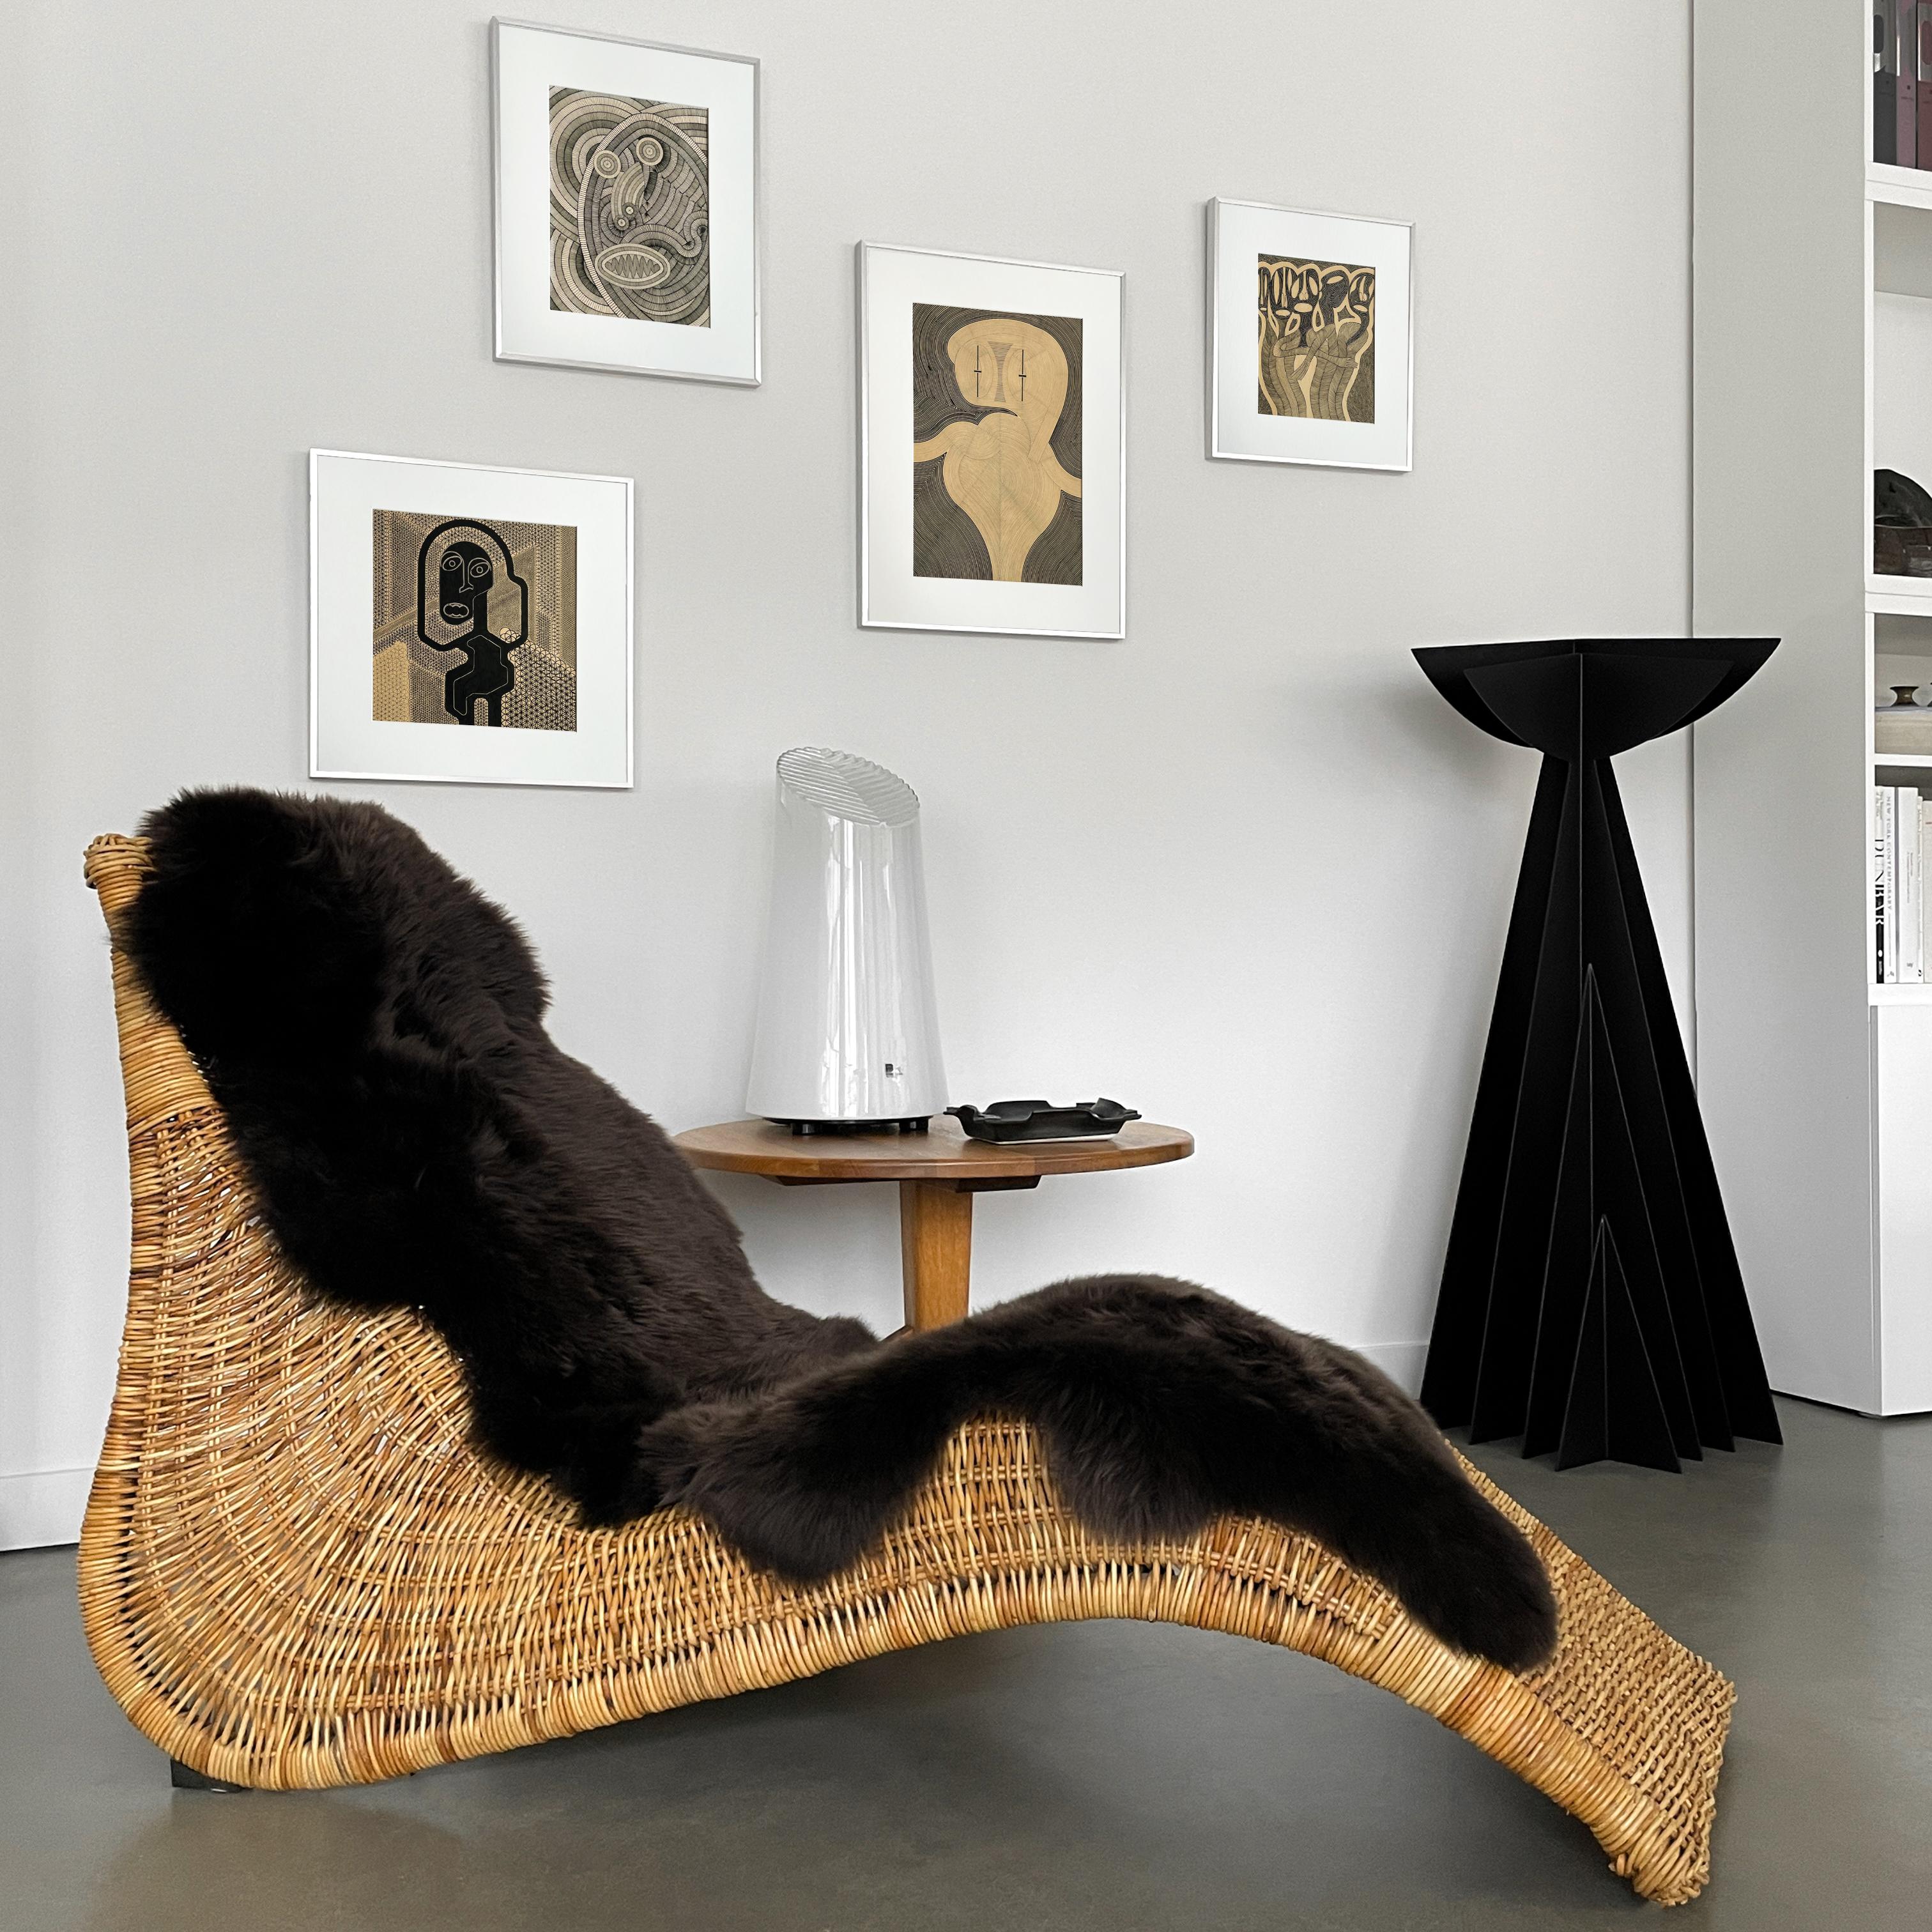 Karlskrona Rattan Wicker Chaise Lounge by Karl Malmvall for Ikea 9